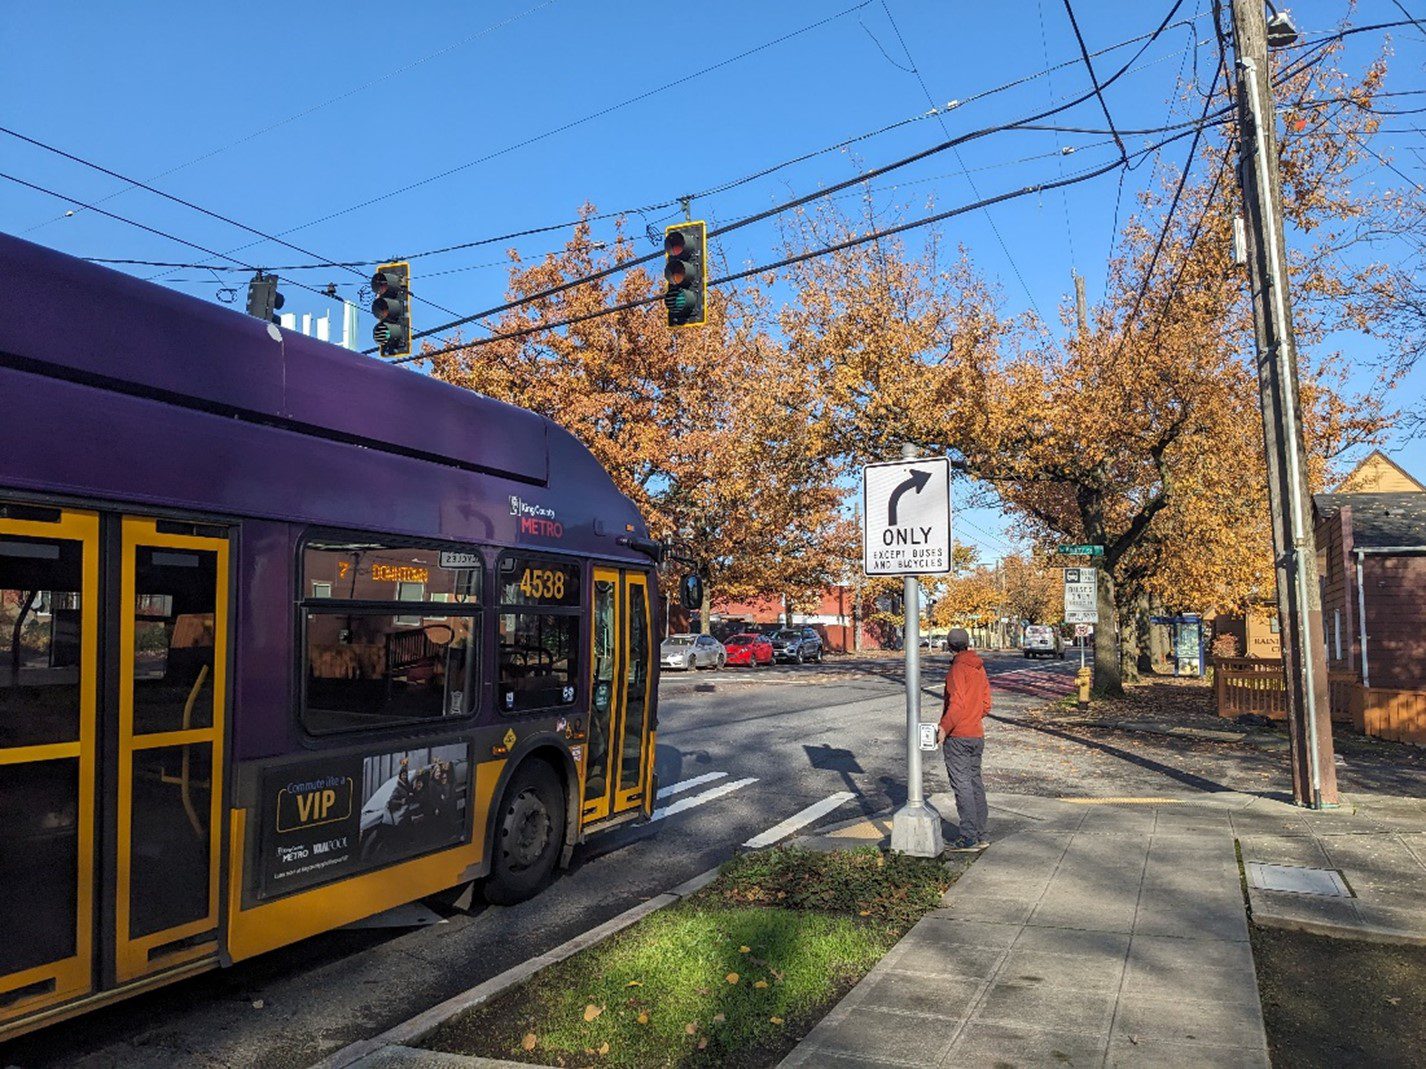 A large bus travels on a street with a person standing on a sidewalk nearby. Blue skies and large trees are in the background.